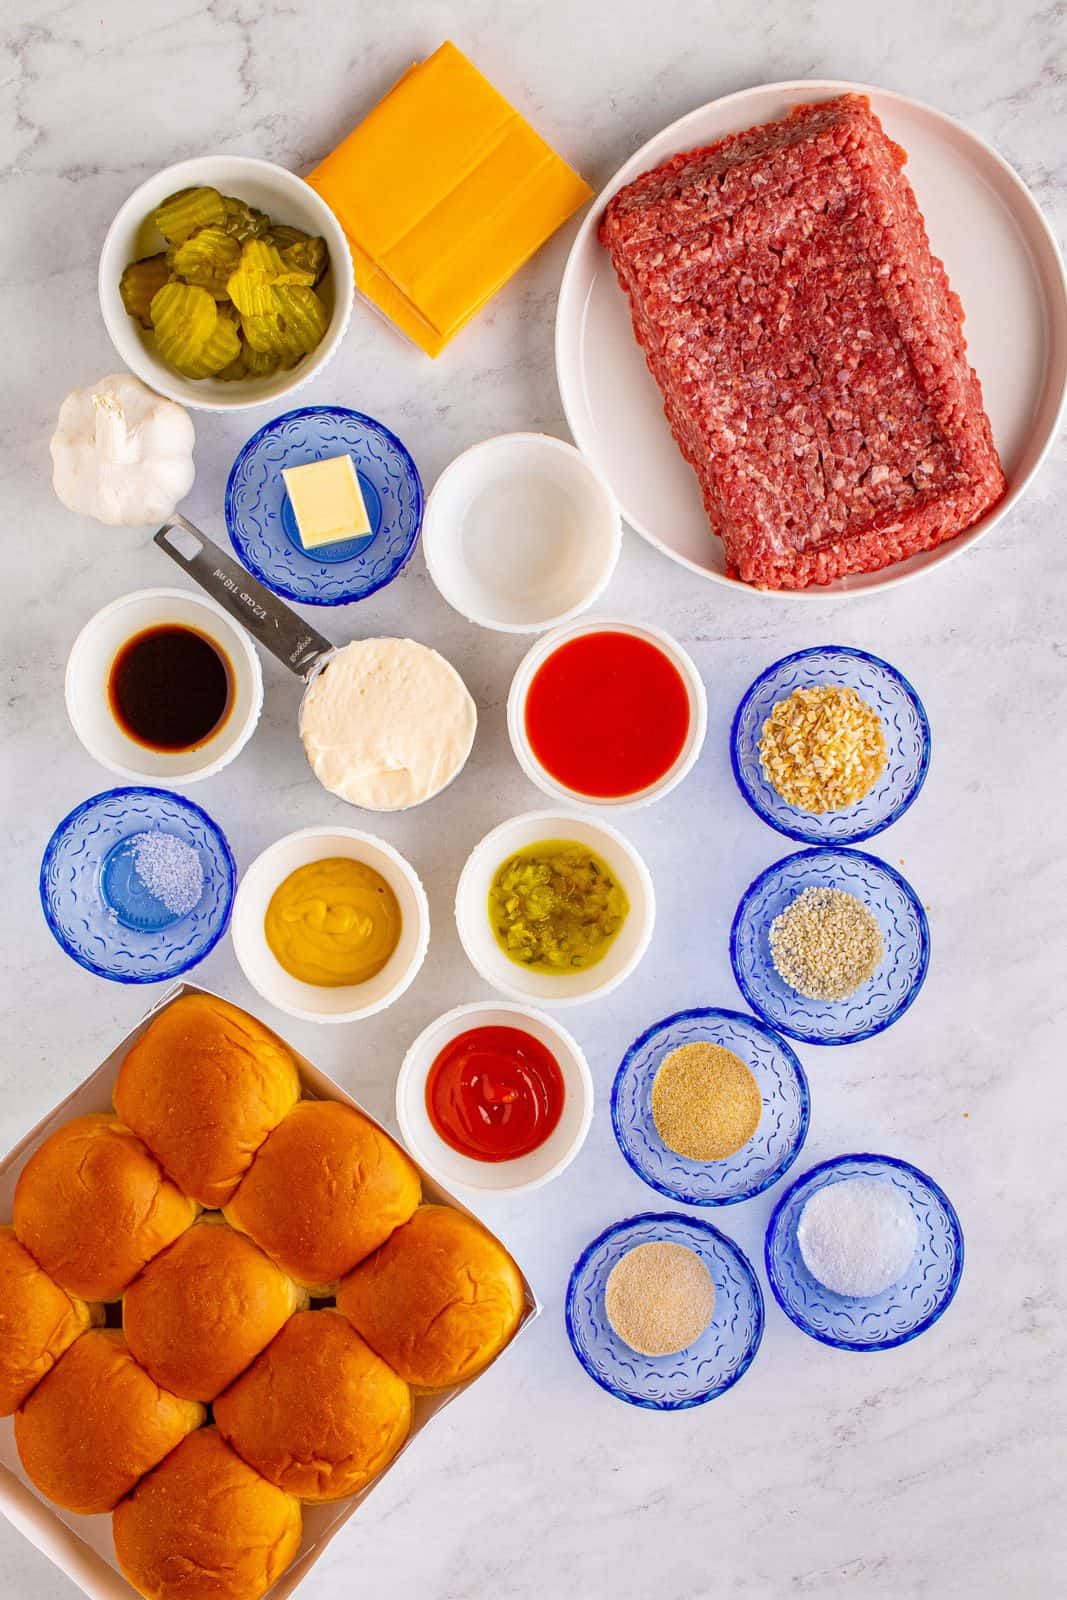 Ingredients needed: mayonnaise, French dressing, dill pickle relish, dried minced onion, granulated sugar, white vinegar, garlic, kosher salt, lean ground beef, Worcestershire sauce, garlic powder, onion powder, Hawaiian slider rolls, American cheese, pickle chips, ketchup, mustard, unsalted butter and sesame seeds.